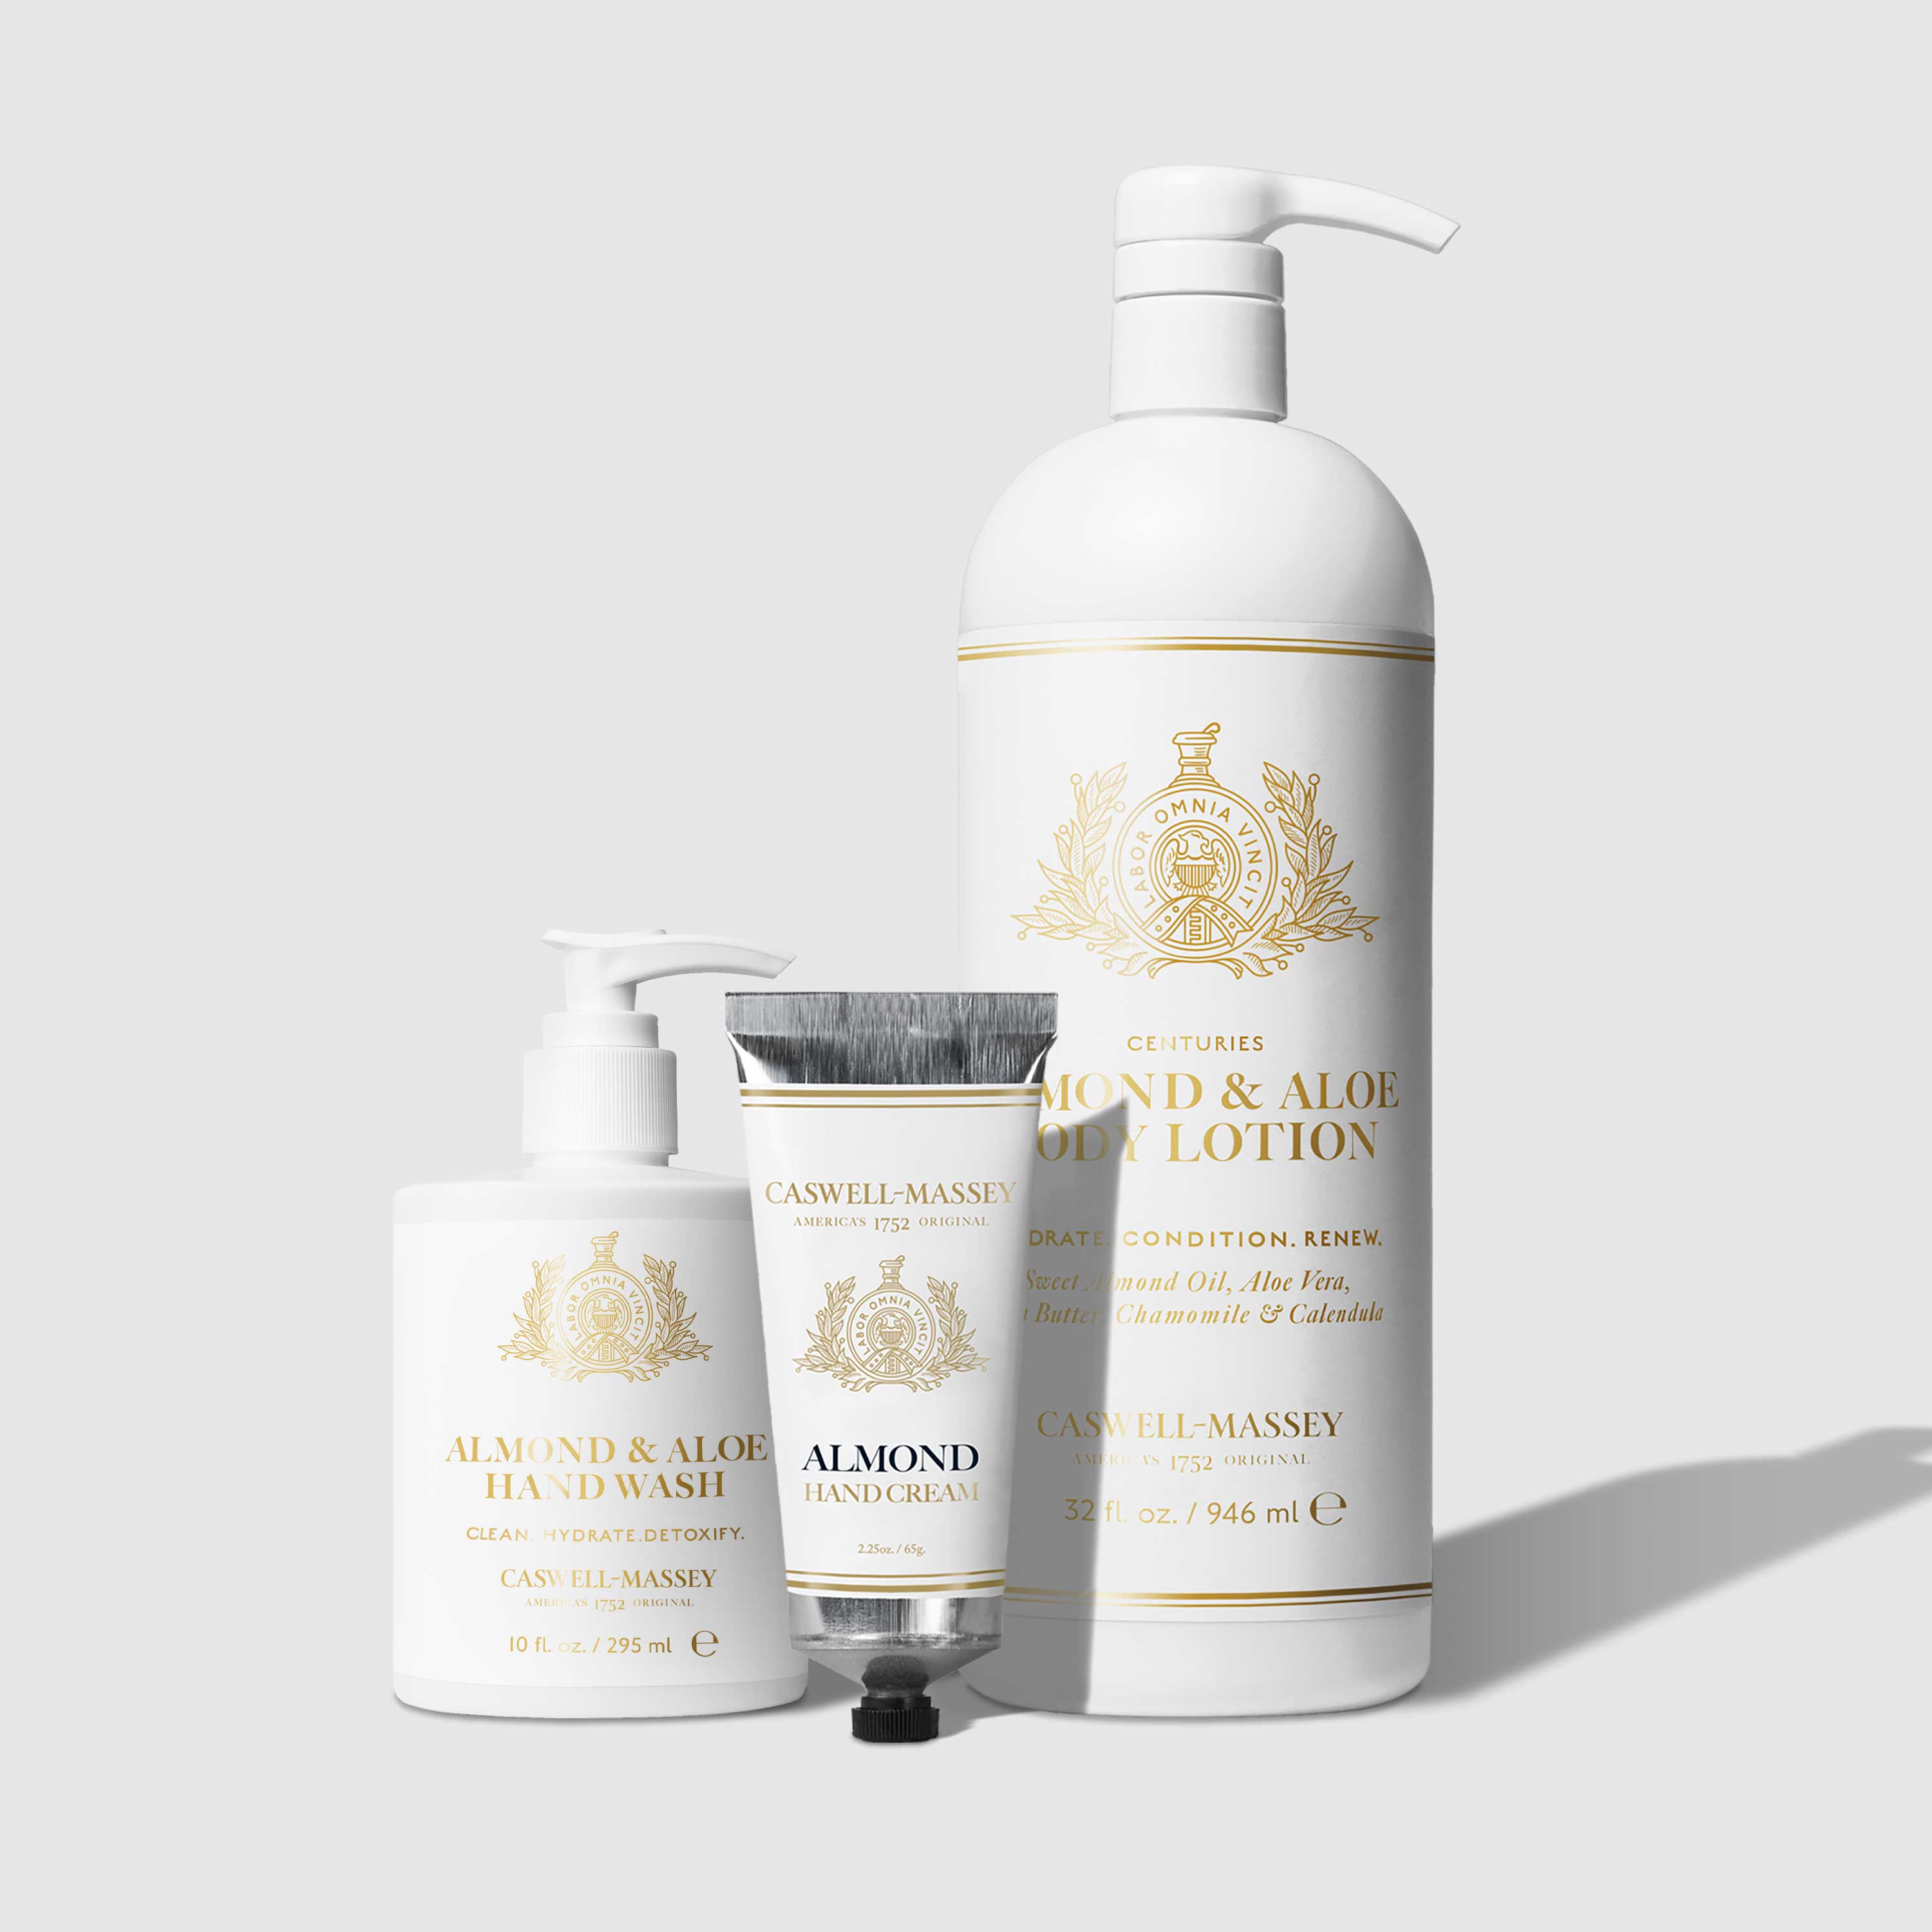 Caswell-Massey® Almond Hand Cream shown with Almond and Aloe Hand Wash and Almond and Aloe Body Lotion